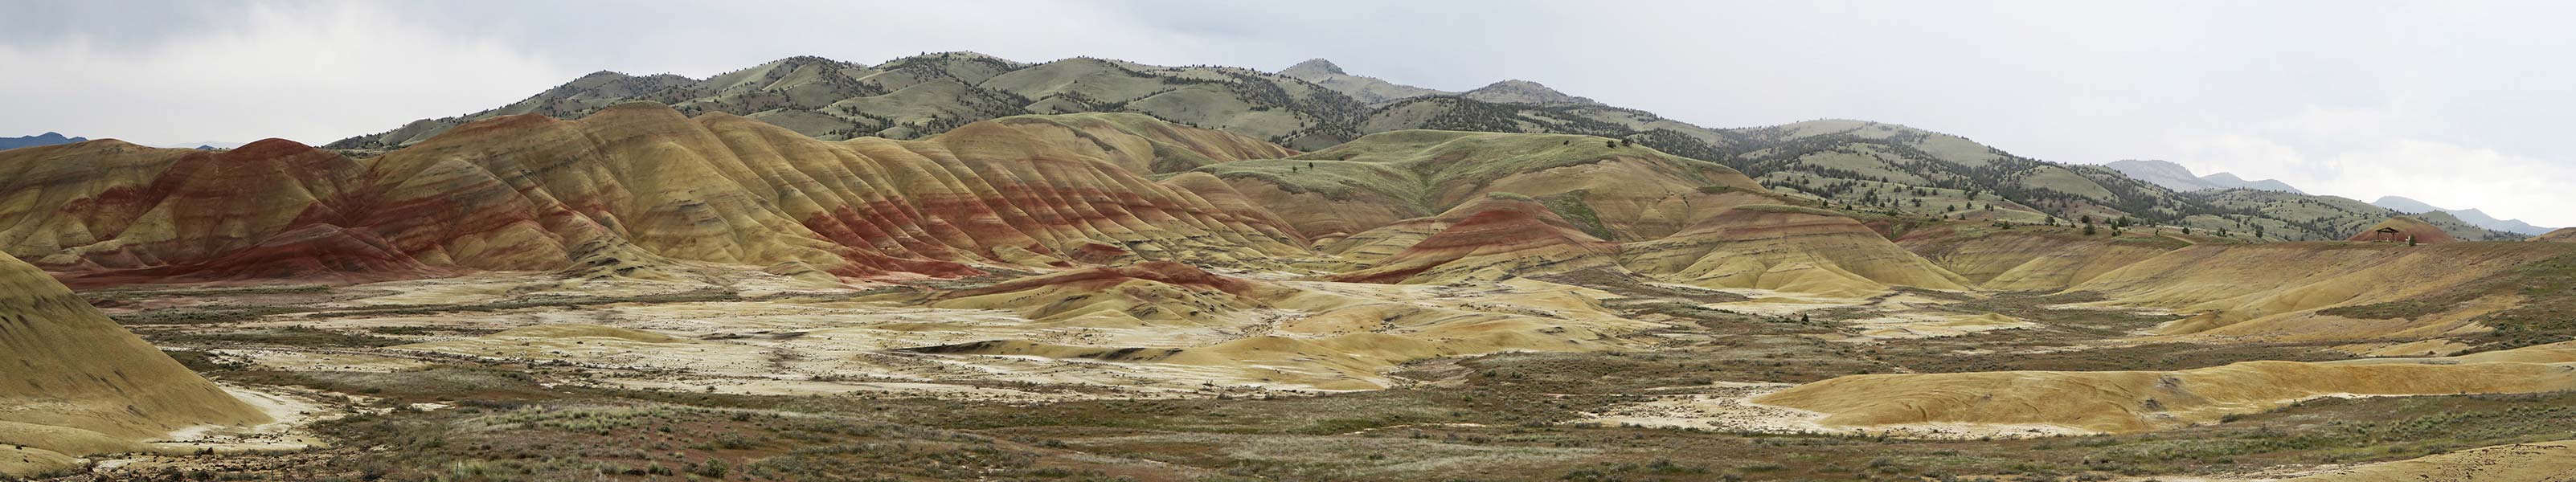 Painted Hills panorama [Bear Creek Road, John Day Fossil Beds National Monument, Wheeler County, Oregon]